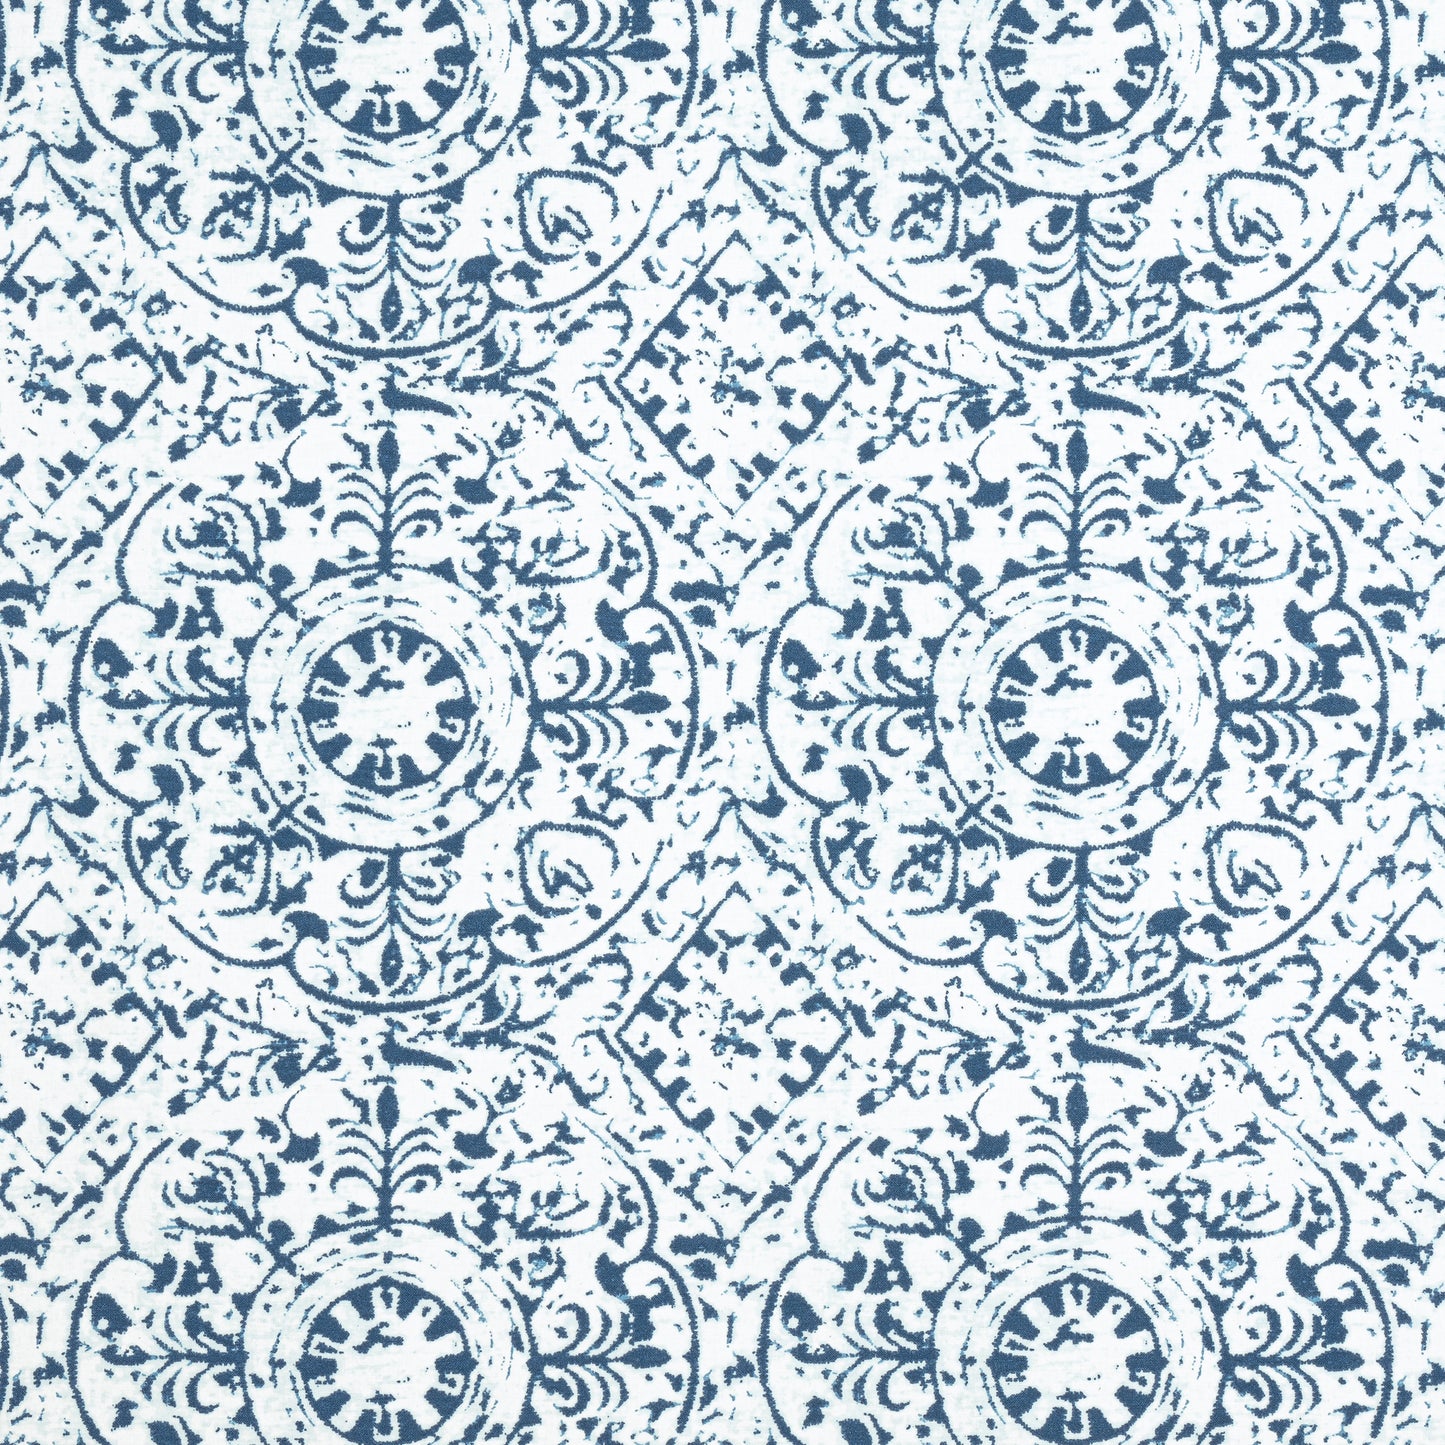 Purchase Thibaut Fabric Product F981312 pattern name Havana color Navy